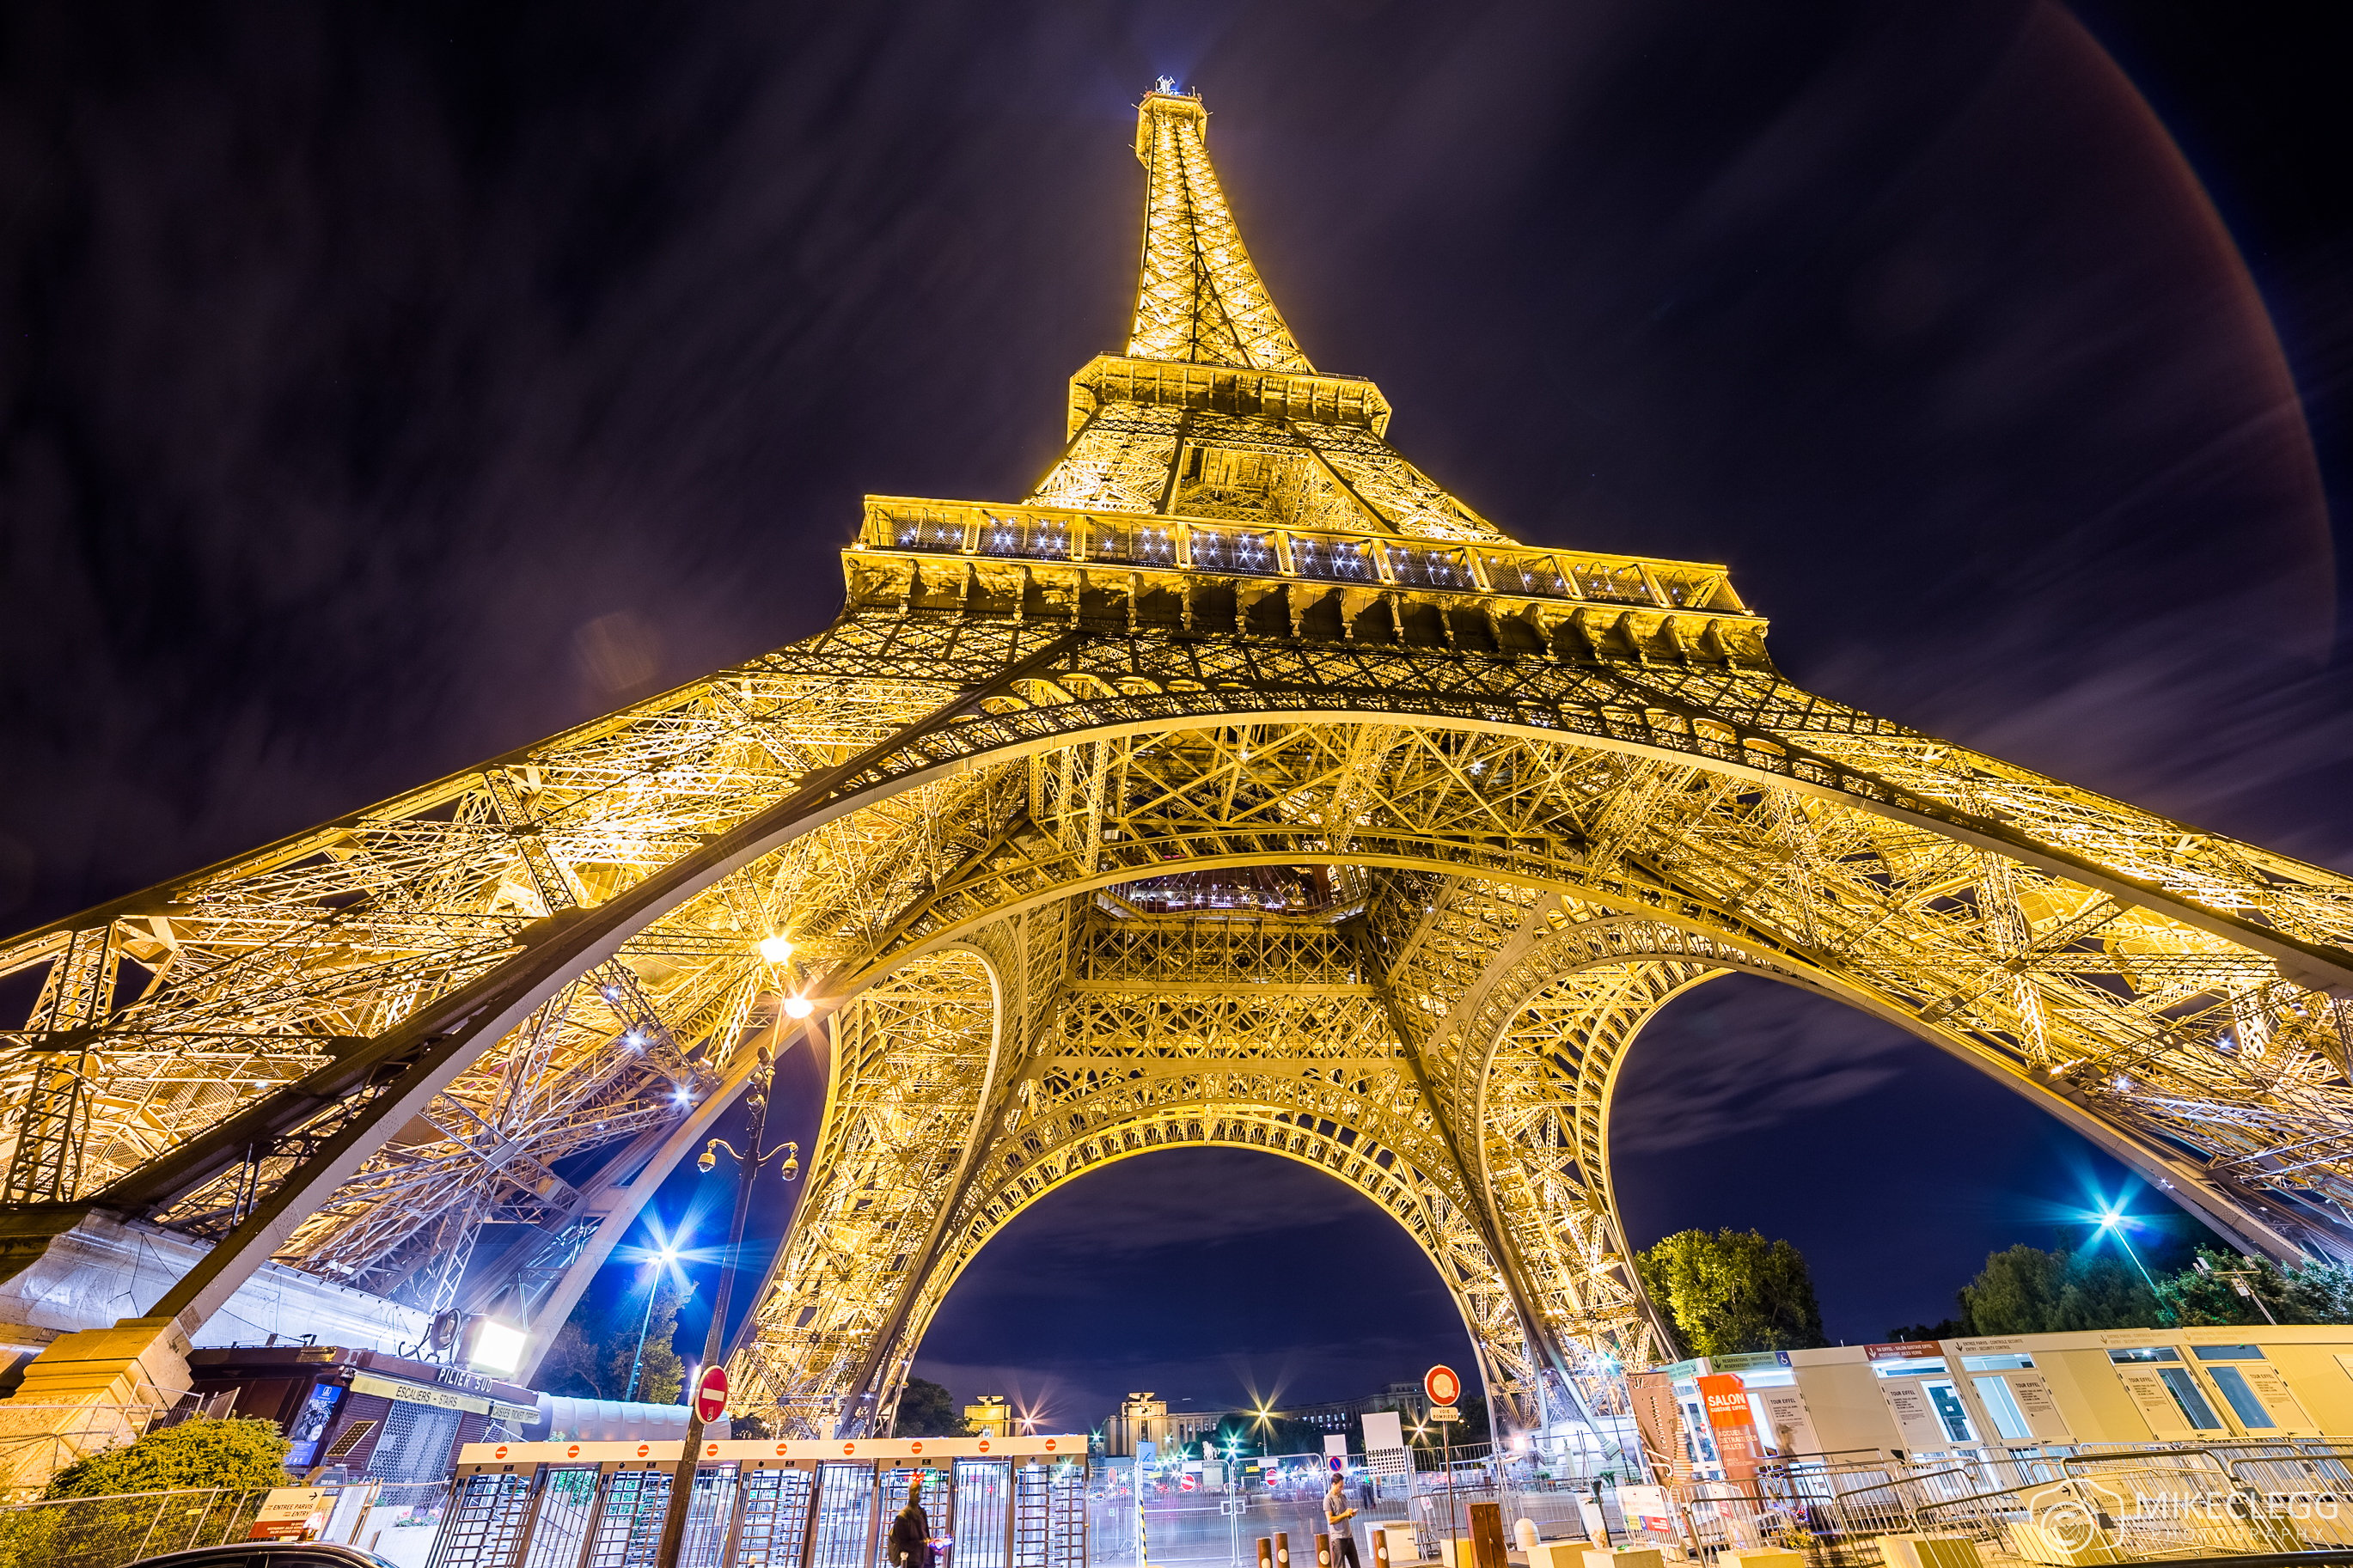 25 Famous and Incredible Landmarks to Add to Your Bucket List